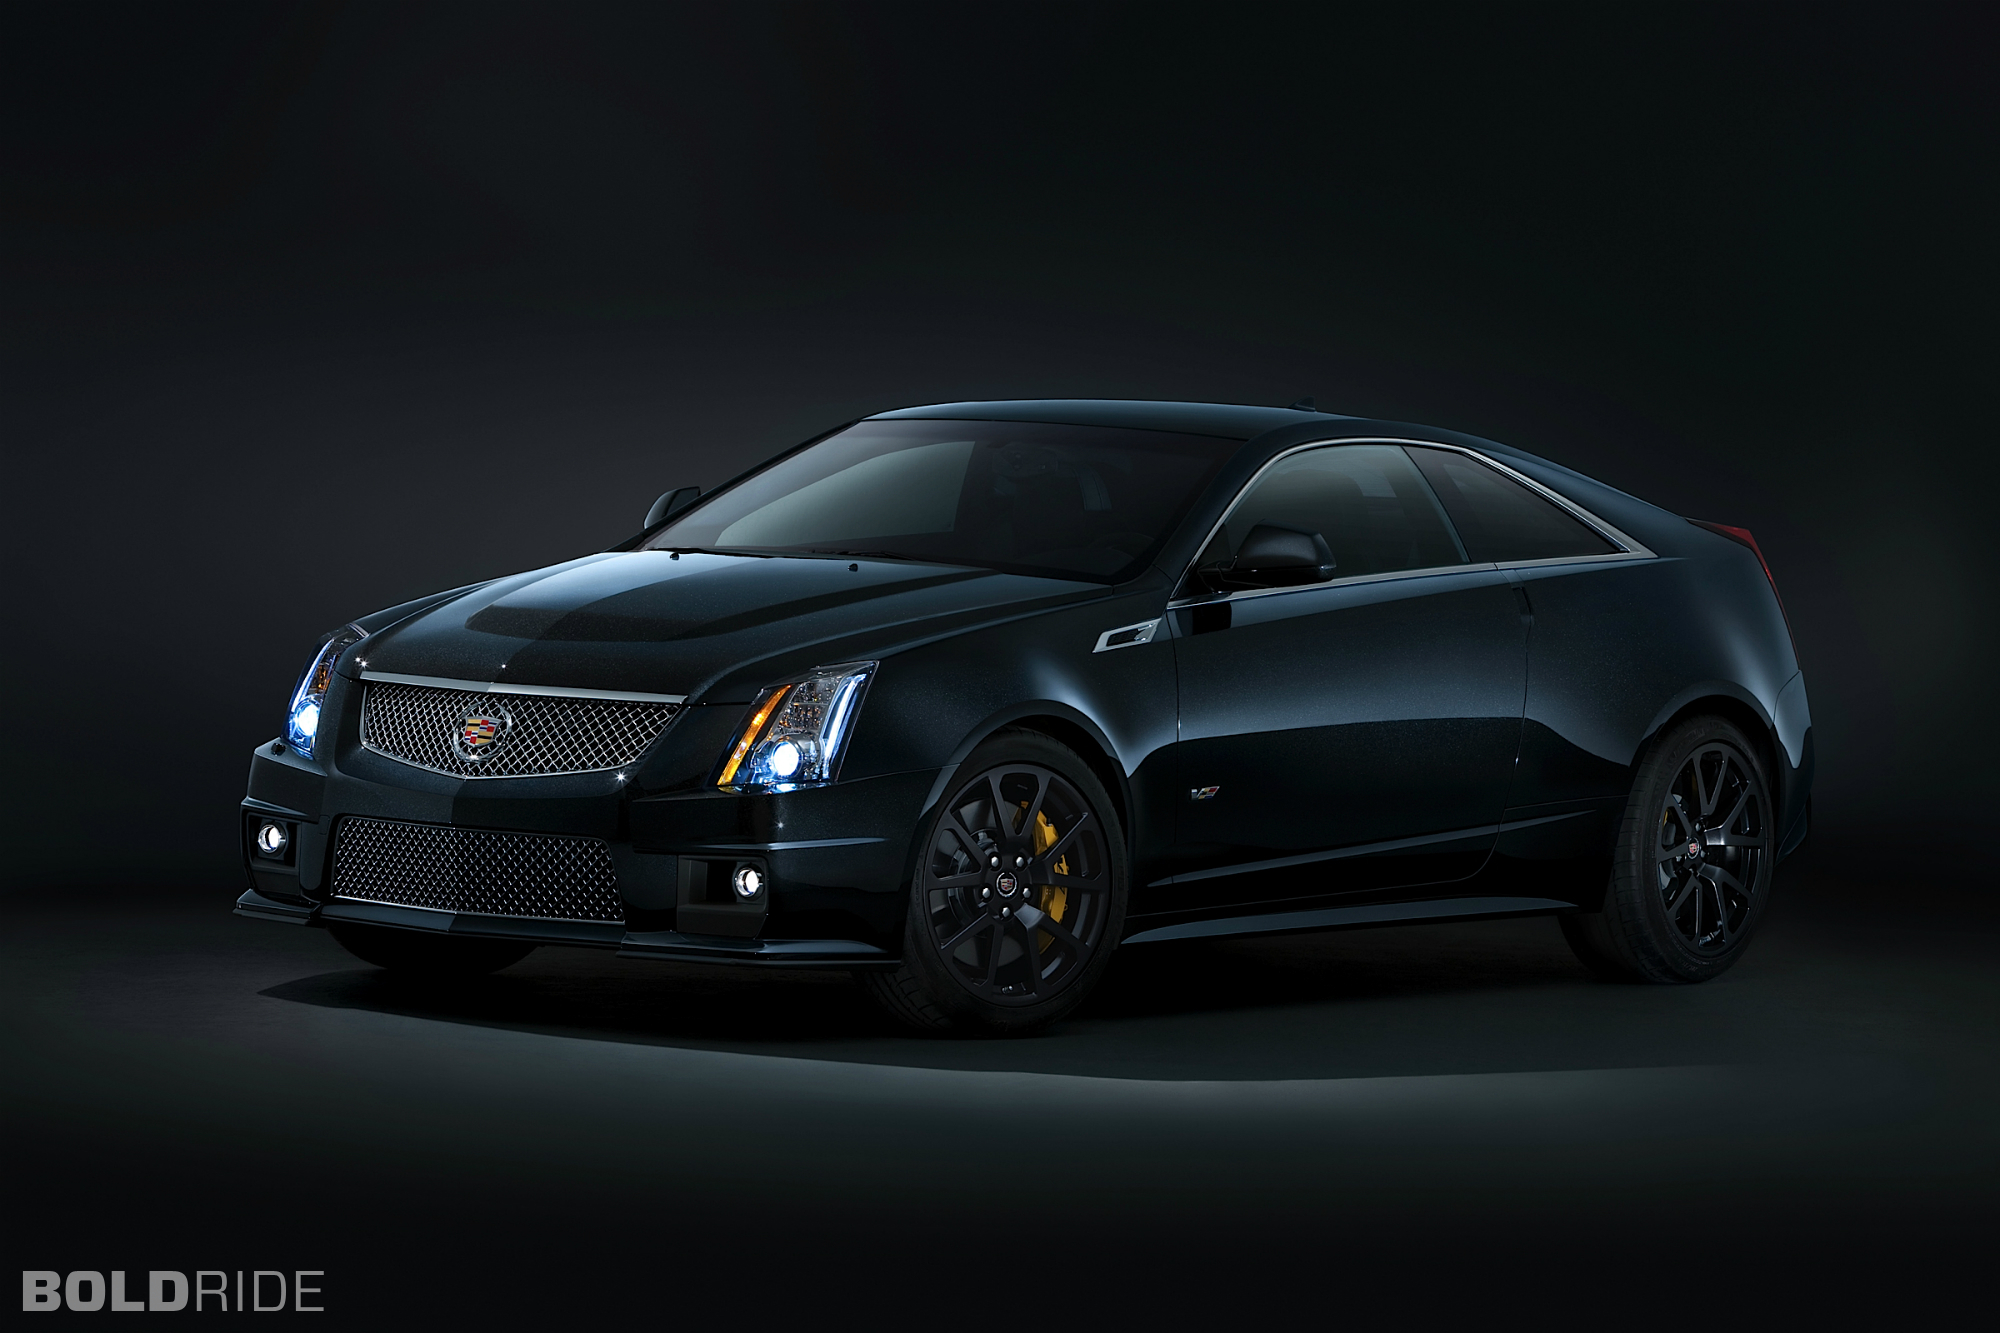 2014, Cadillac, Cts v, Coupe, Muscle, Sportcar Wallpaper